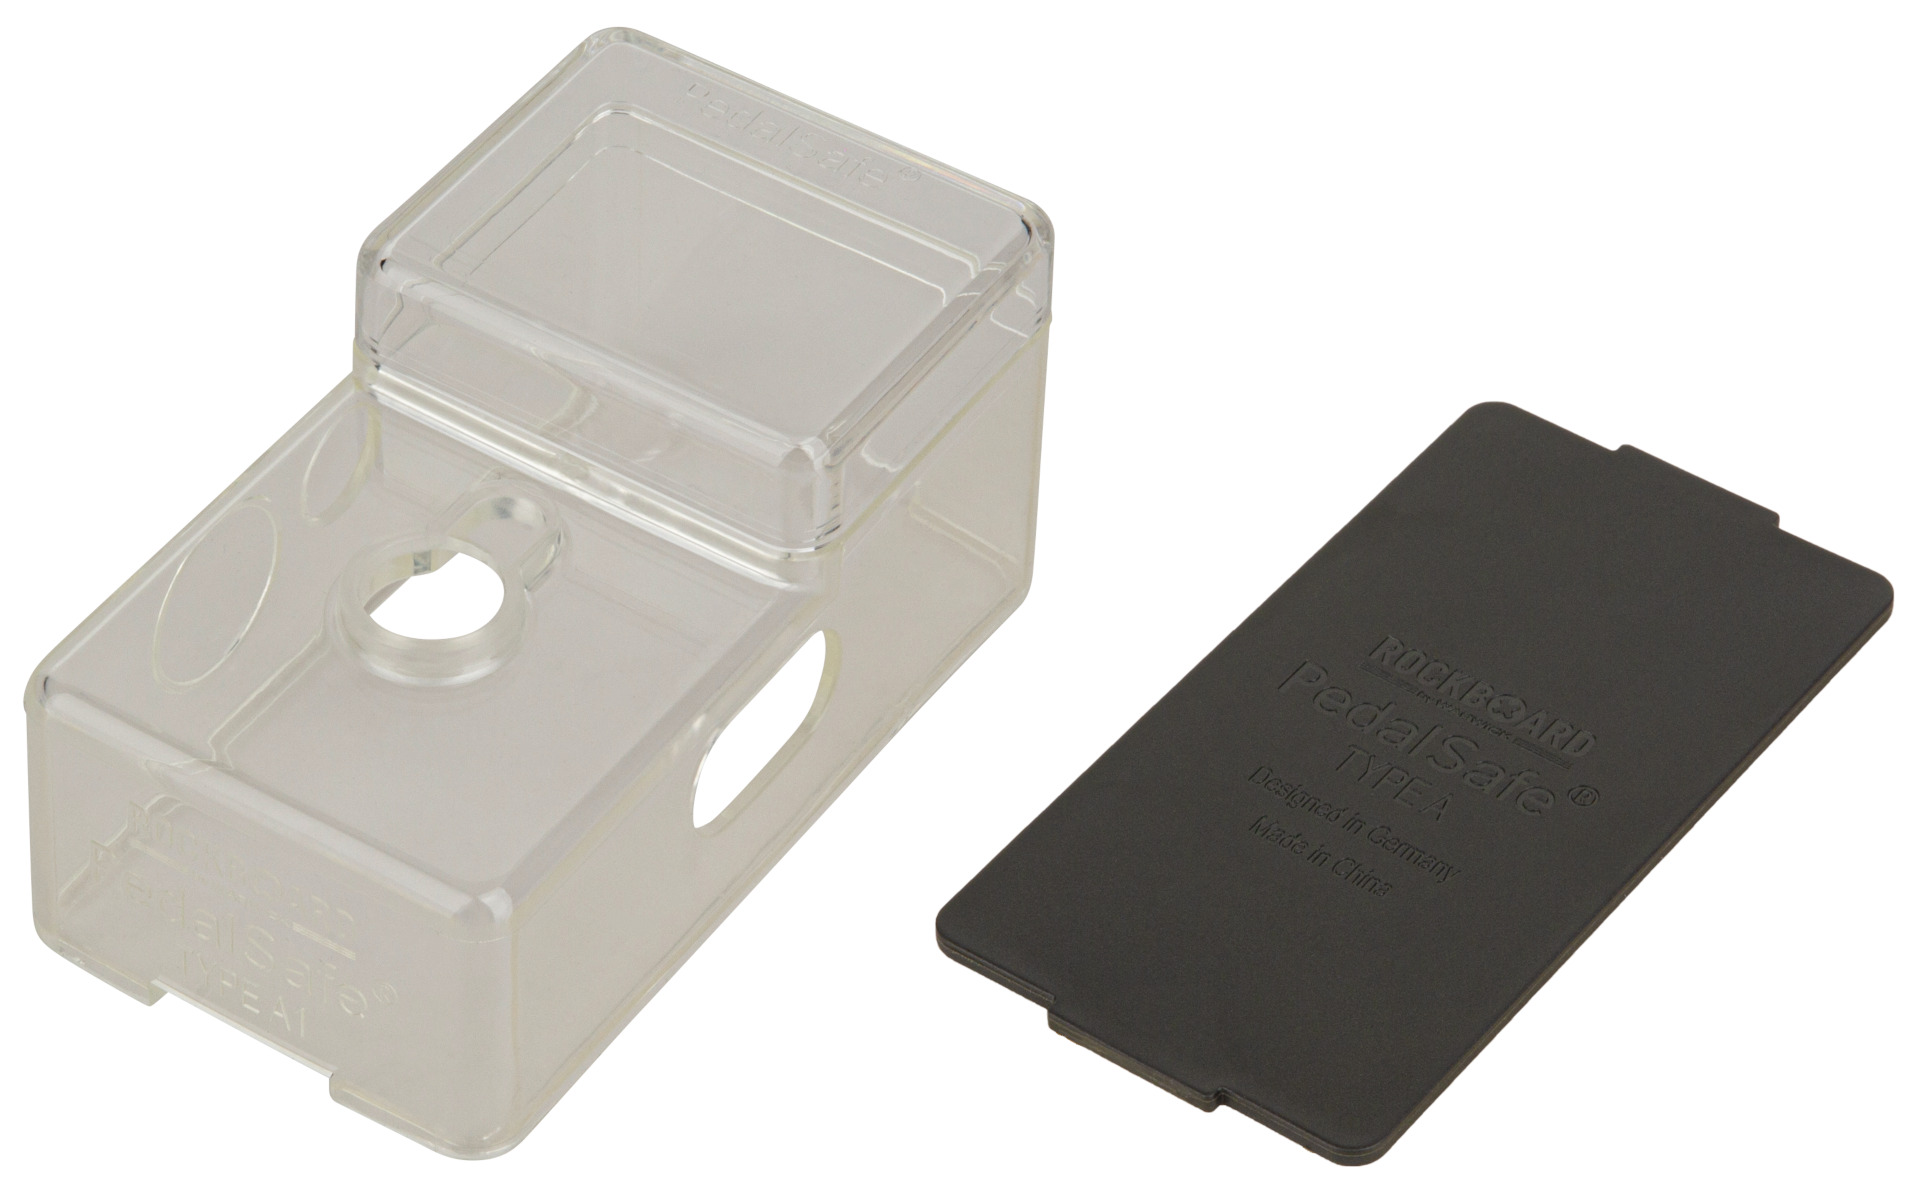 RockBoard PedalSafe Type A1 - Protective Cover And Universal Mounting Plate For Standard Single Pedals